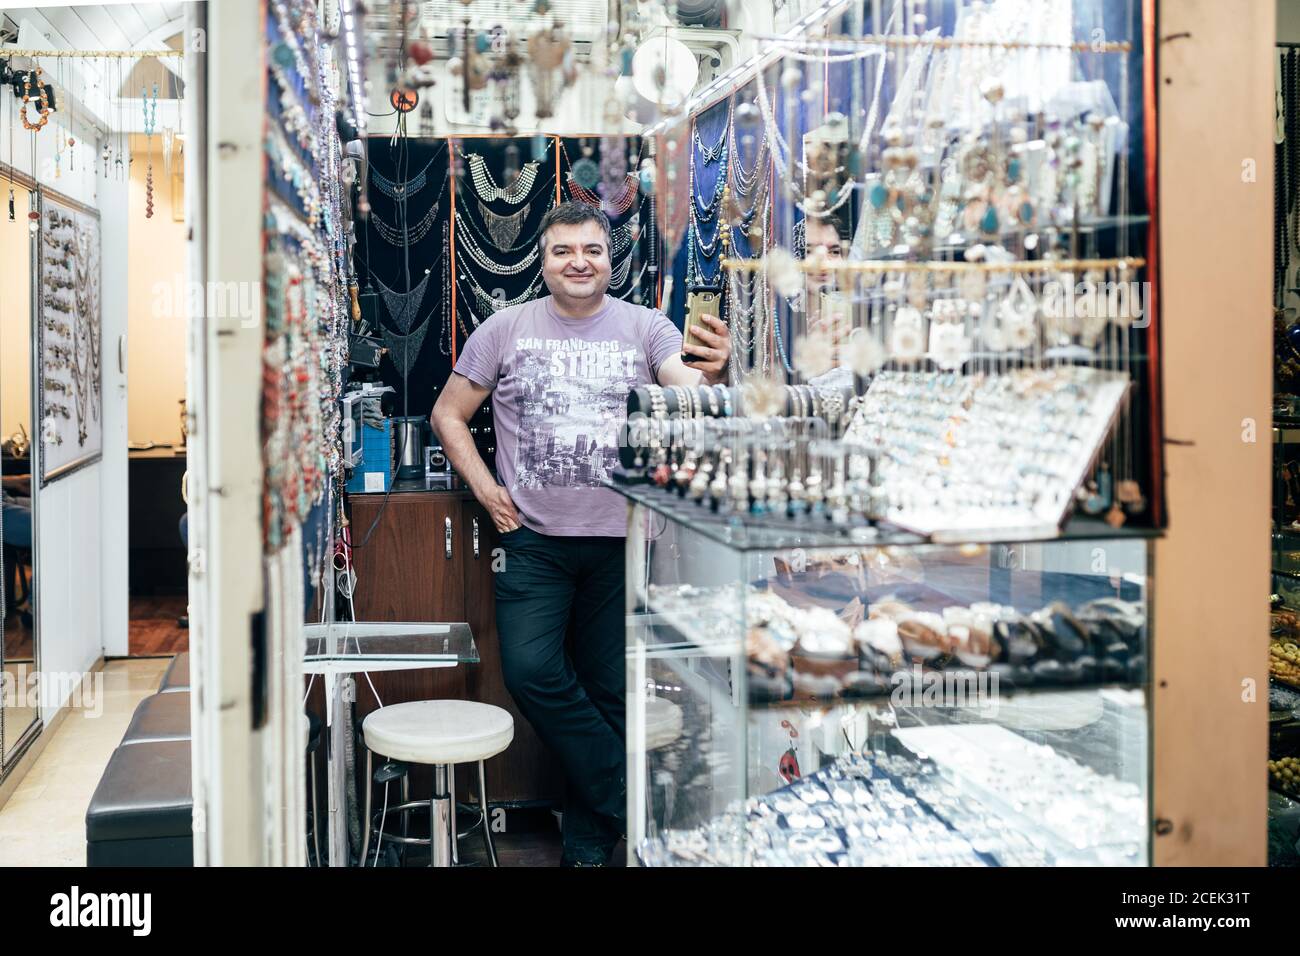 Istanbul, Turkey - August,?20 2018: Cheerful adult shop assistant in  bijouterie shop looking at camera Stock Photo - Alamy